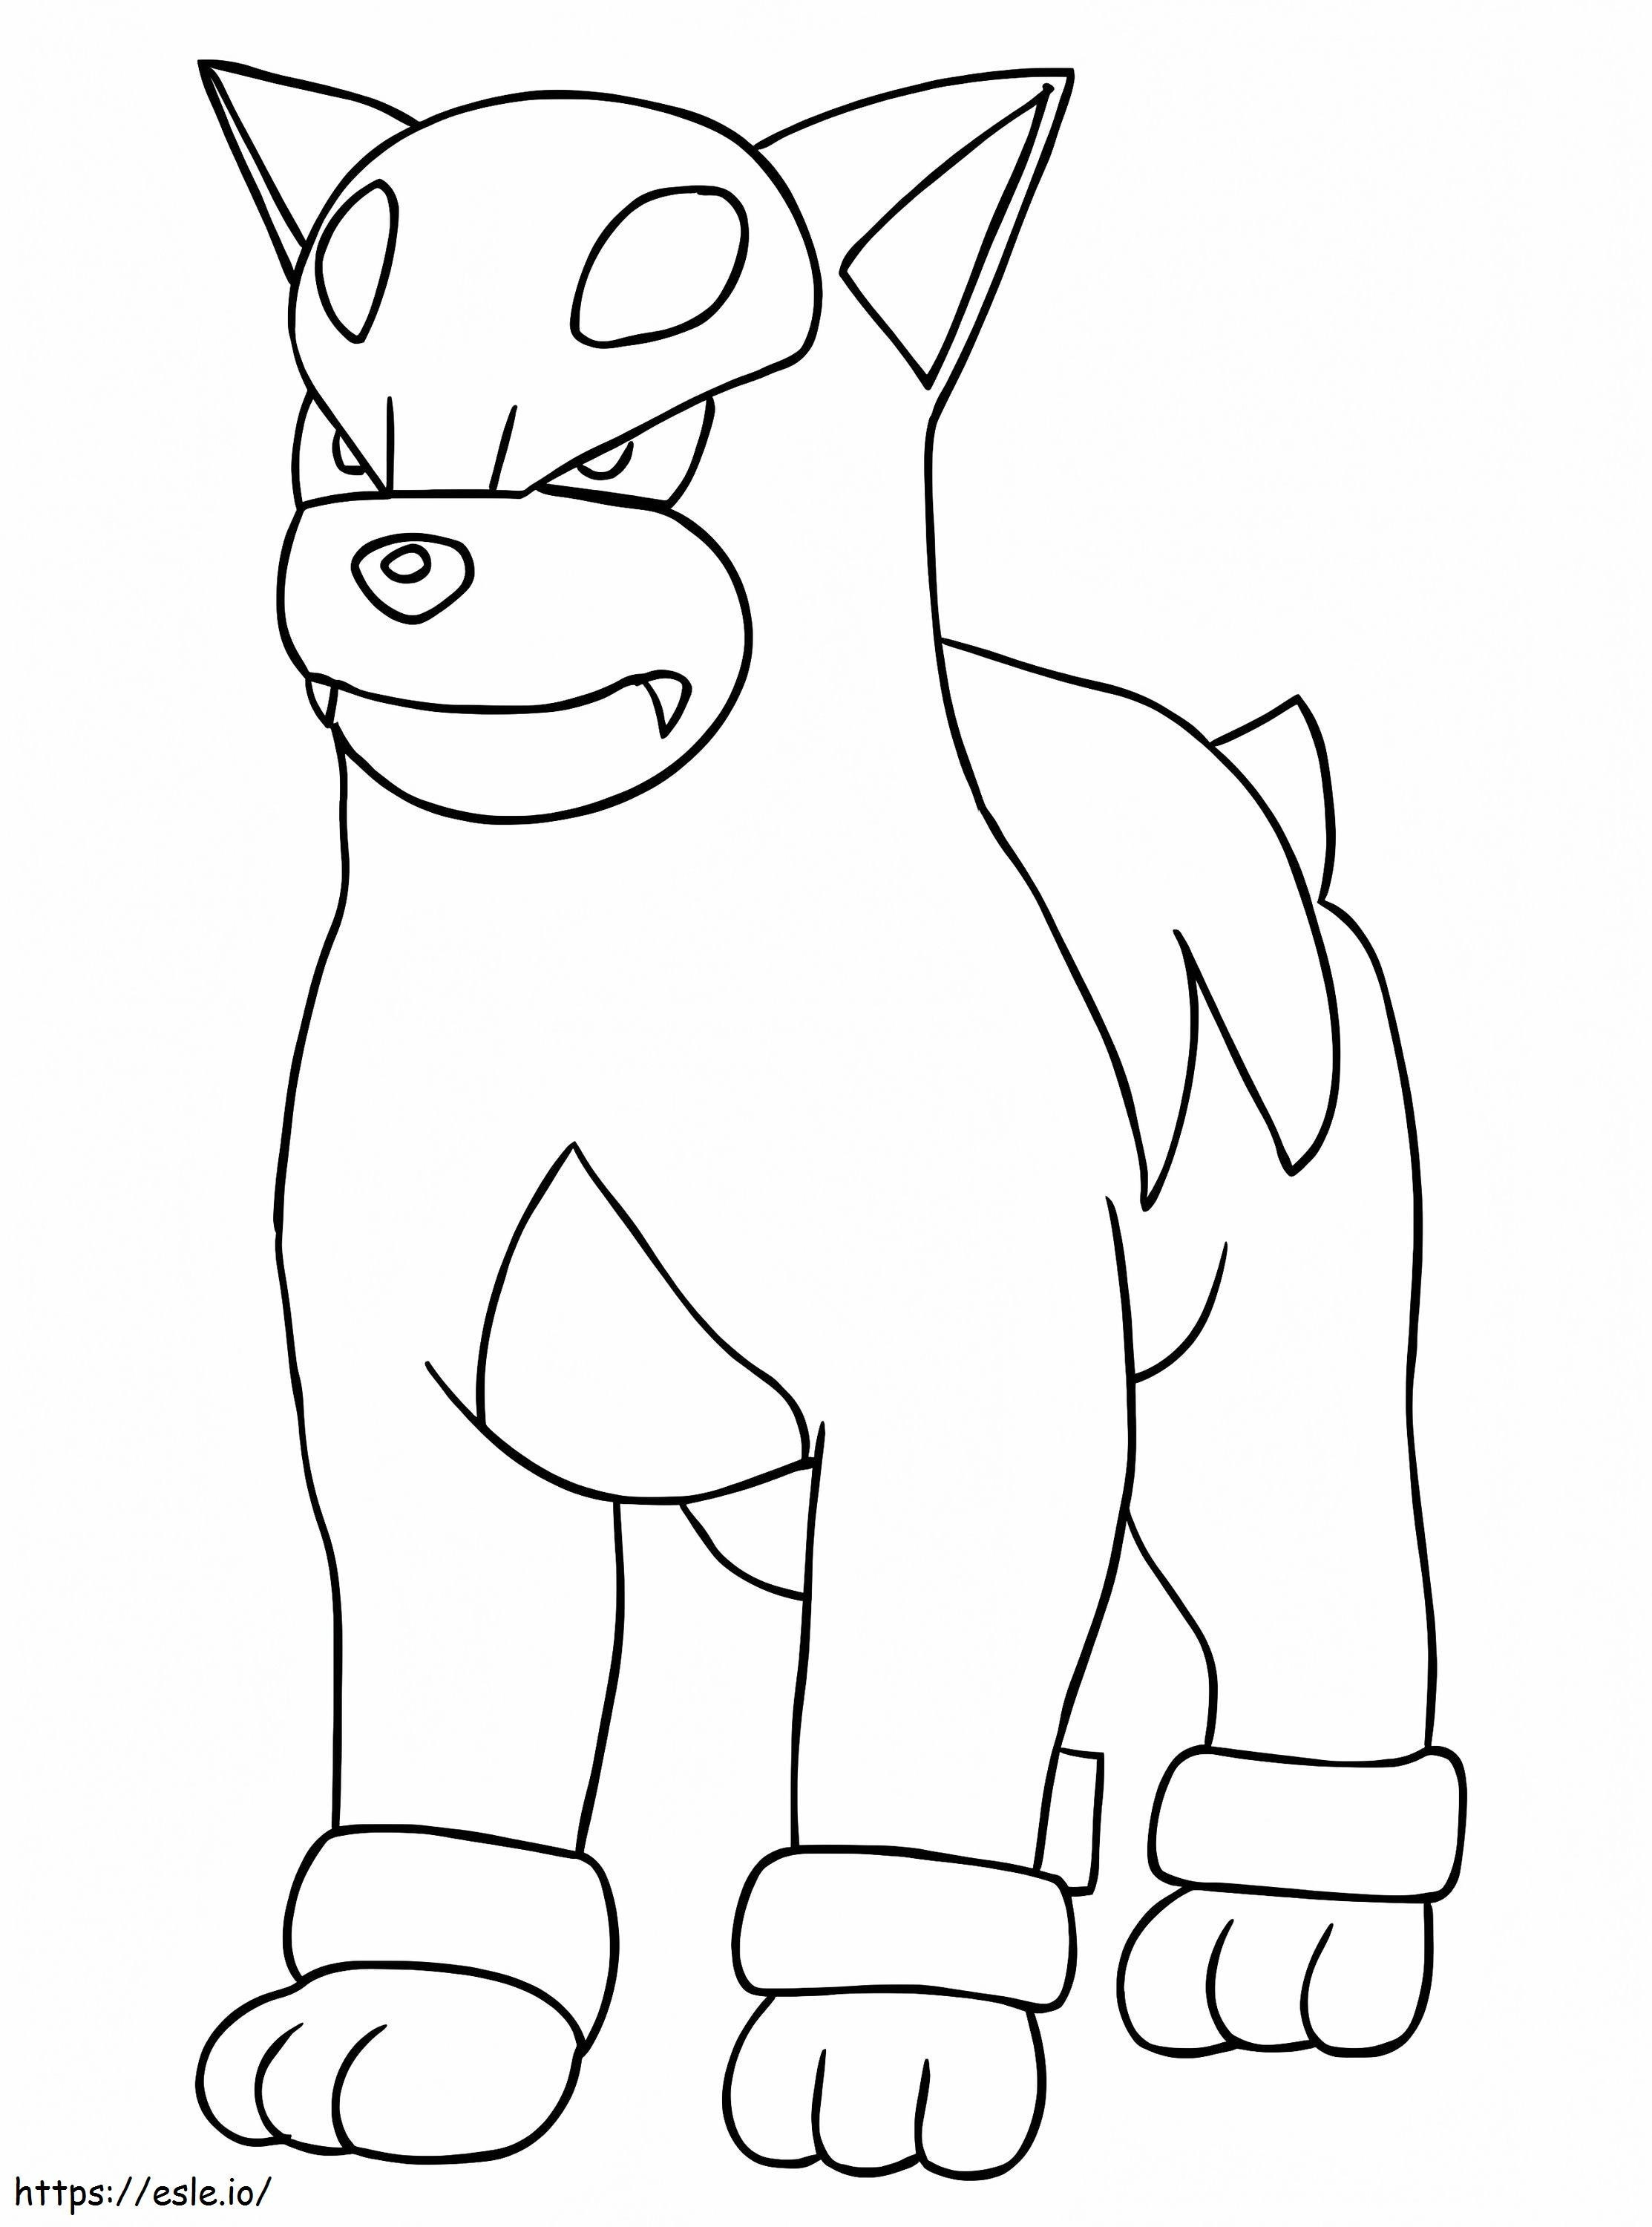 Angry Houndour Pokemon coloring page